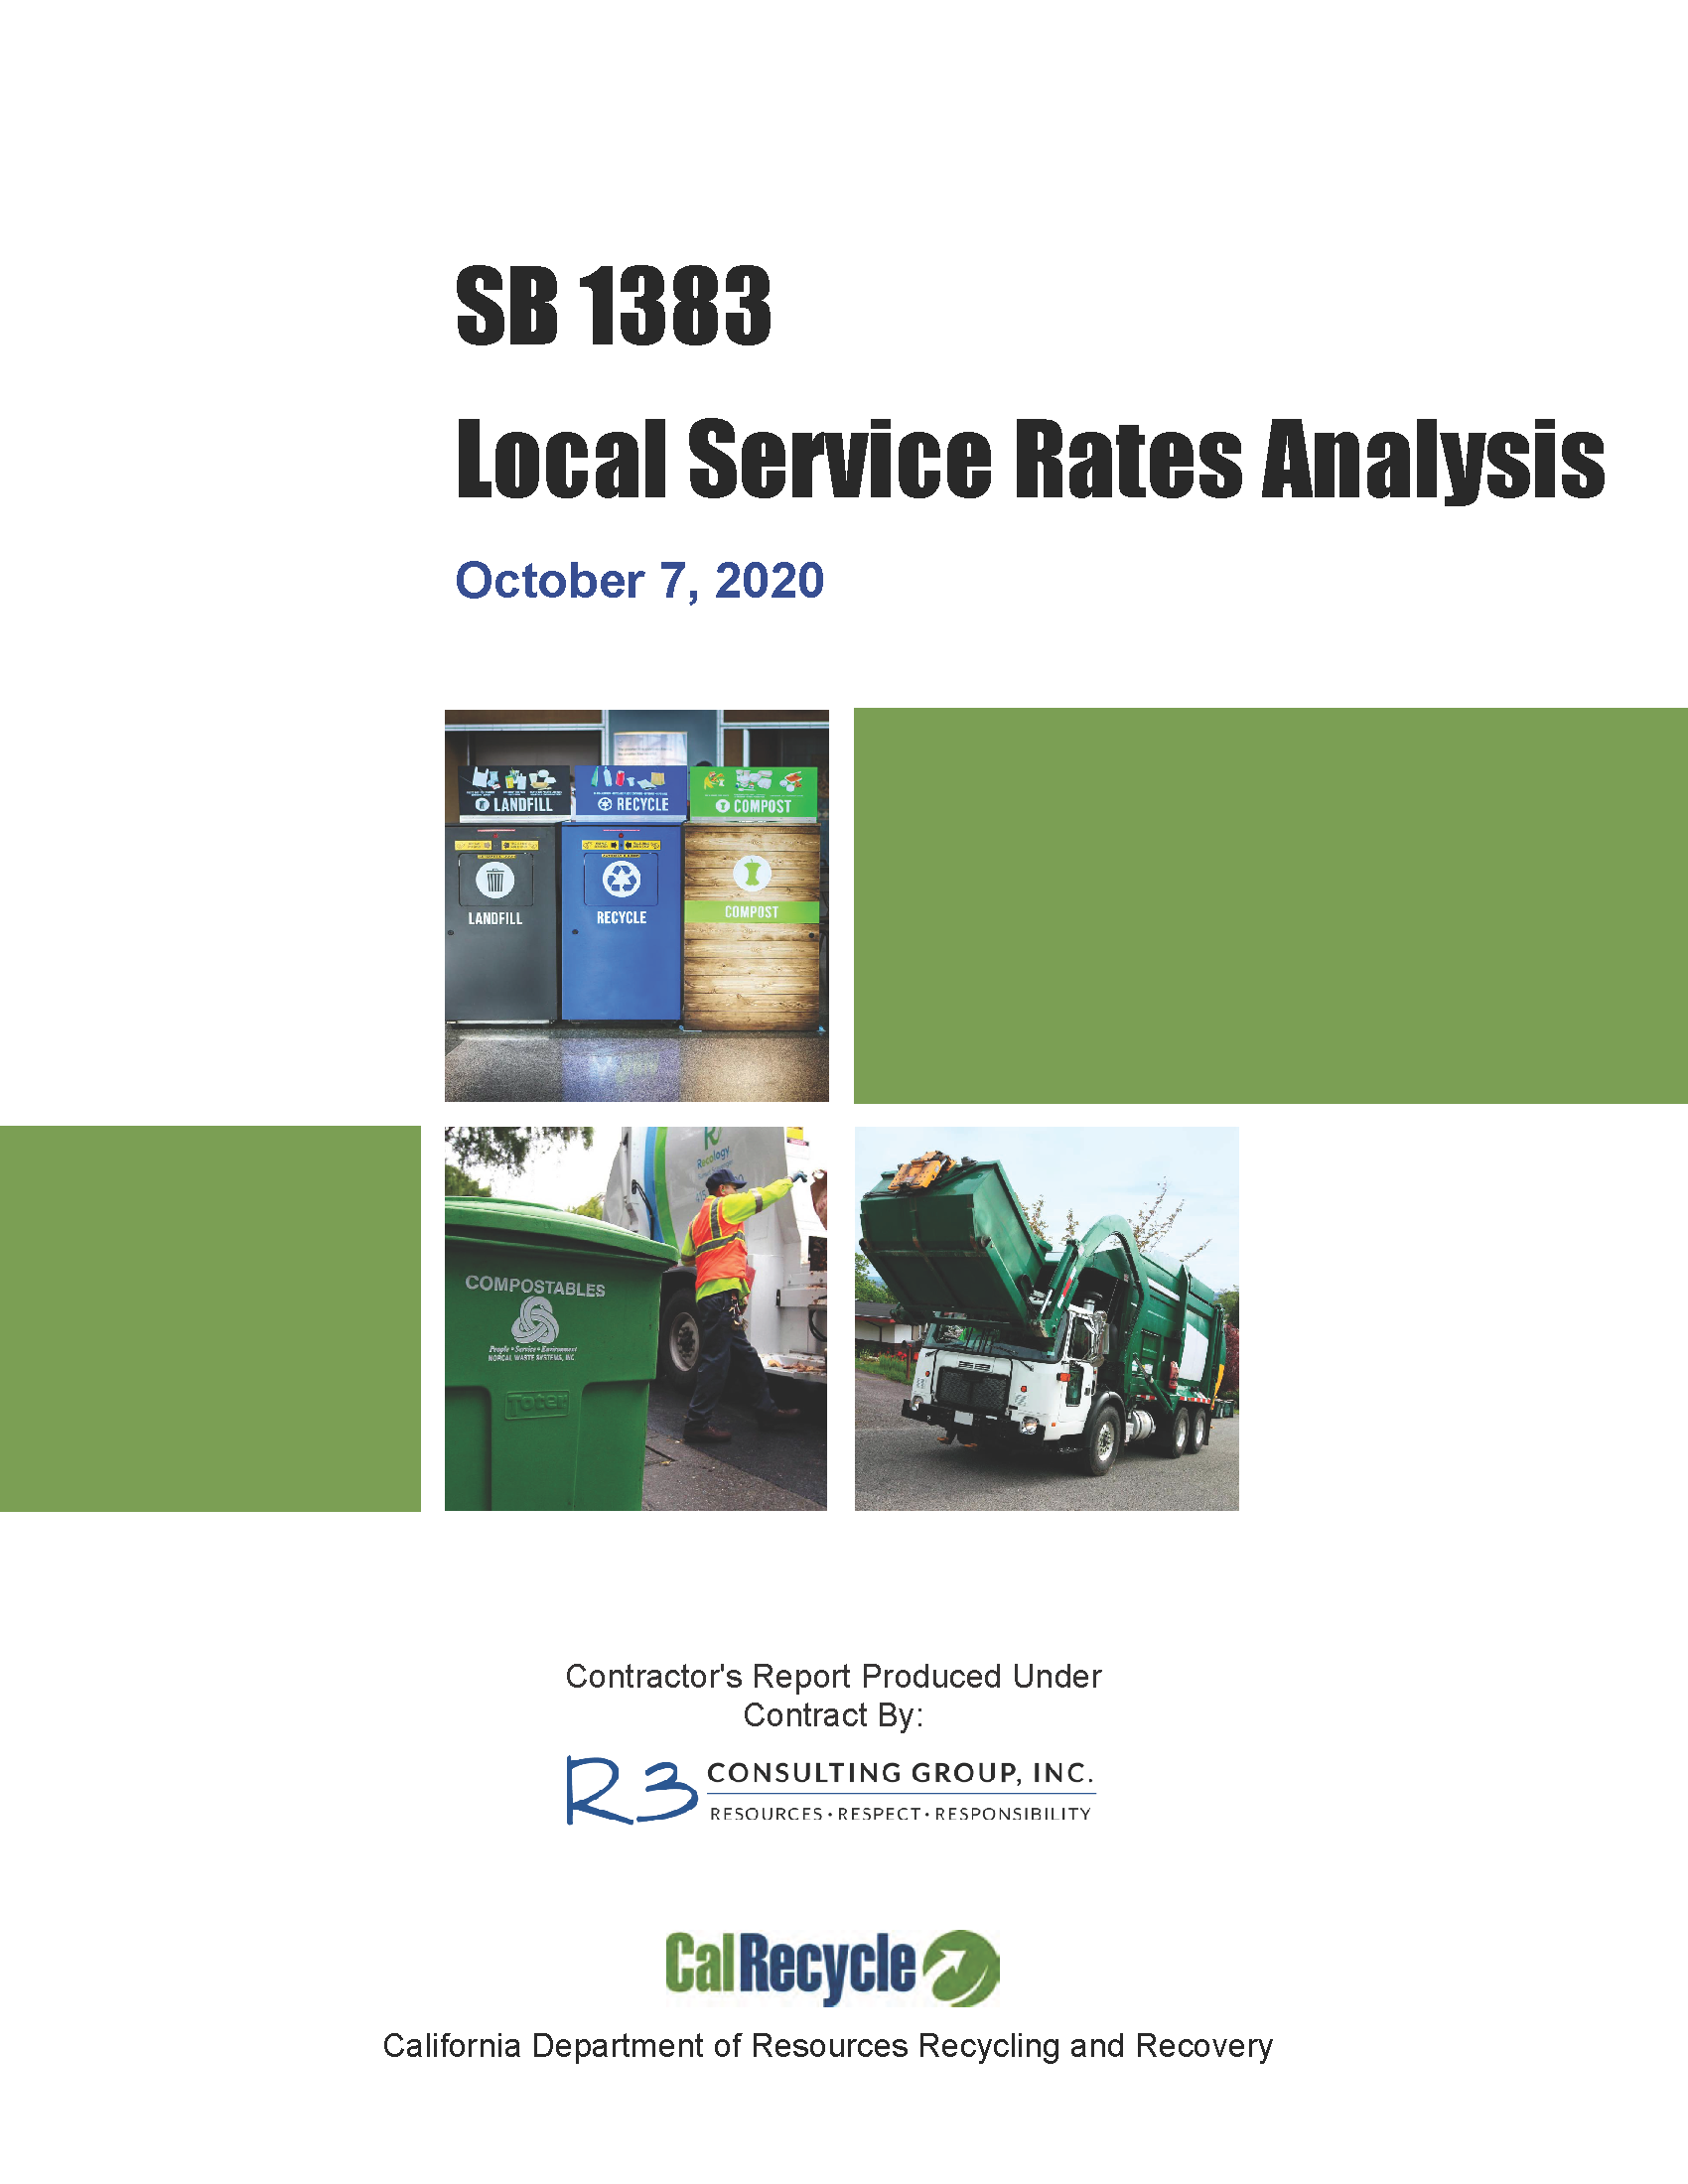 SB 1383 local services rates analysis